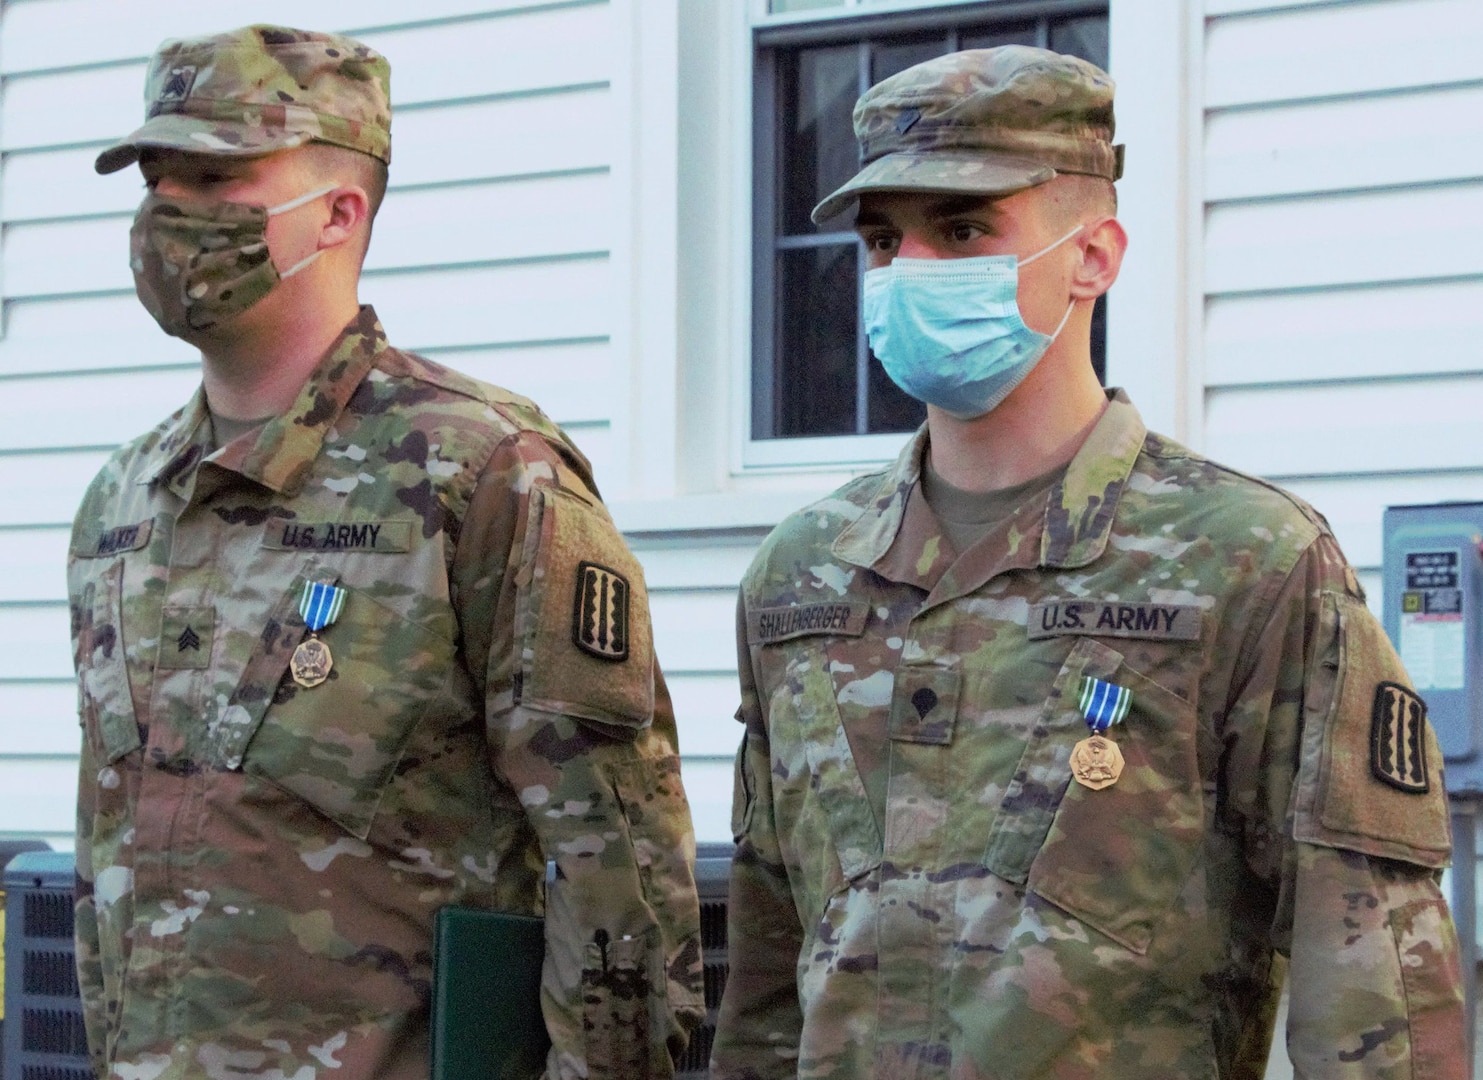 Sgt. Michael Walker and Spc. Luke Shallenberger take top honors in the Virginia Beach-based 329th Regional Support Group Best Warrior Competition held Dec. 10-11, 2020, at Fort Pickett, Virginia.